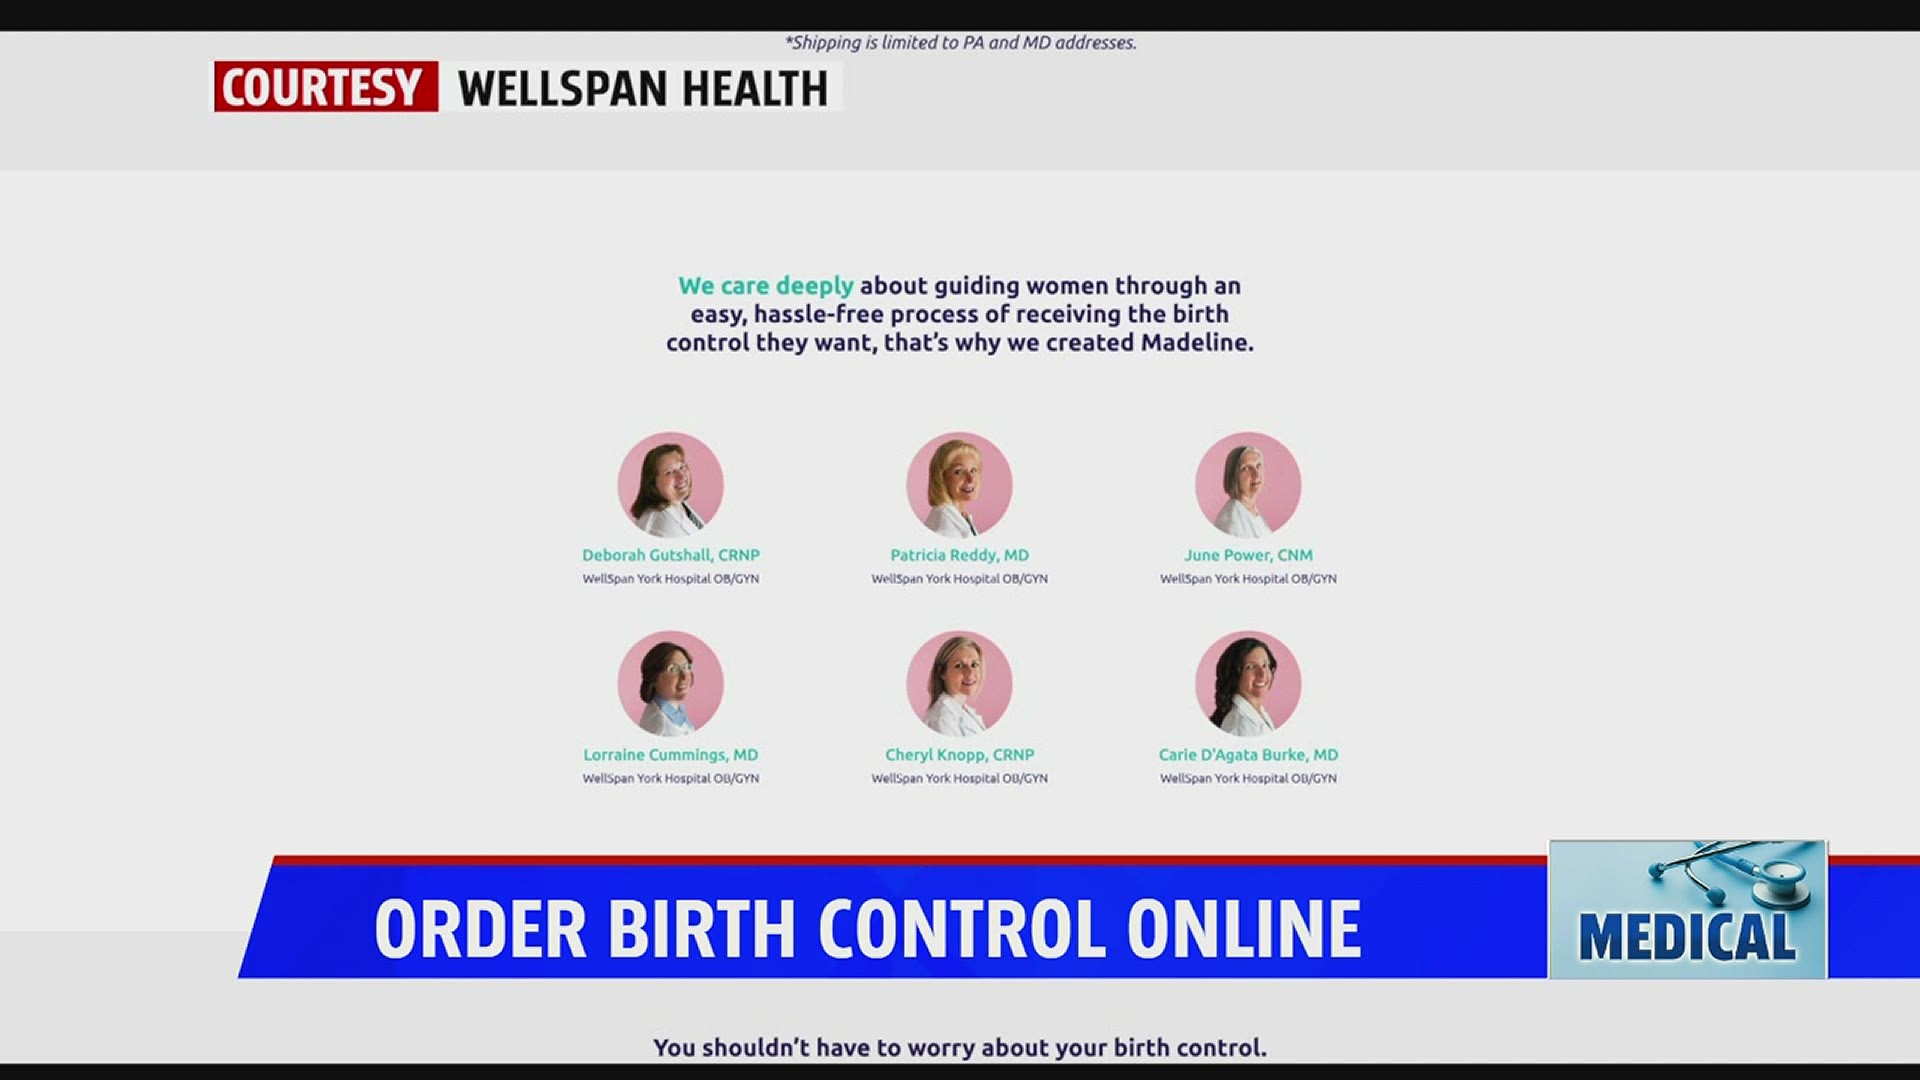 The site allows women to go online to order their birth control, choosing their preferred method, and having the prescription delivered straight to their door.